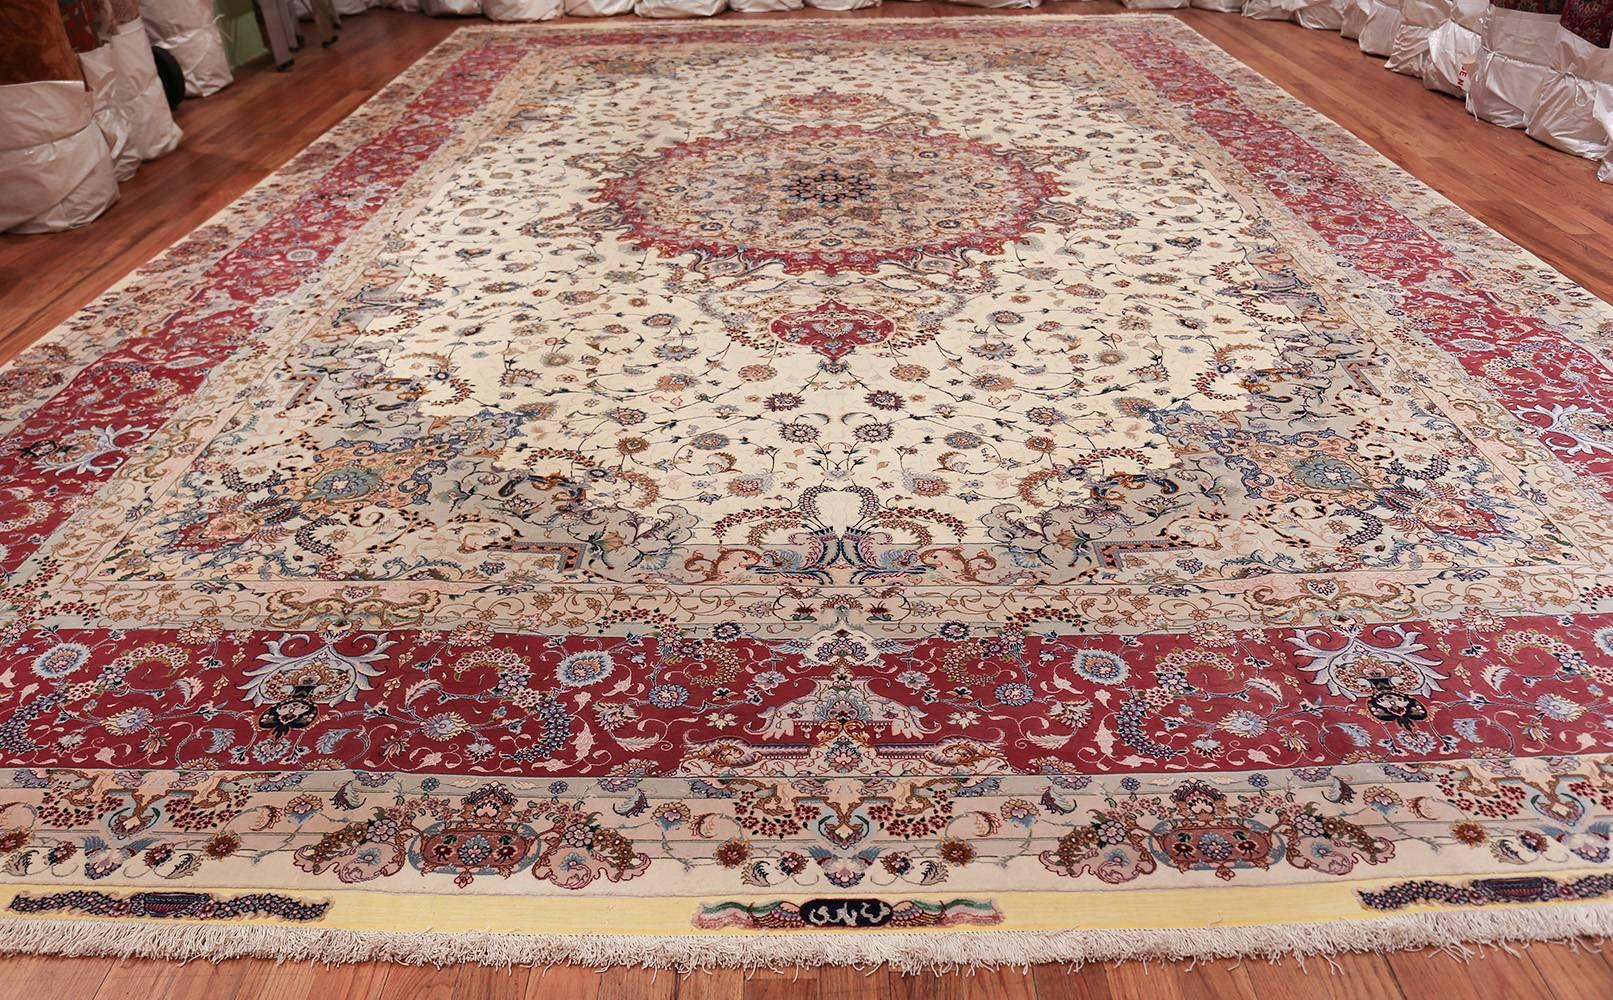 Oversize Silk and Wool Vintage Persian Tabriz Rug. Size: 13 ft x 20 ft 2